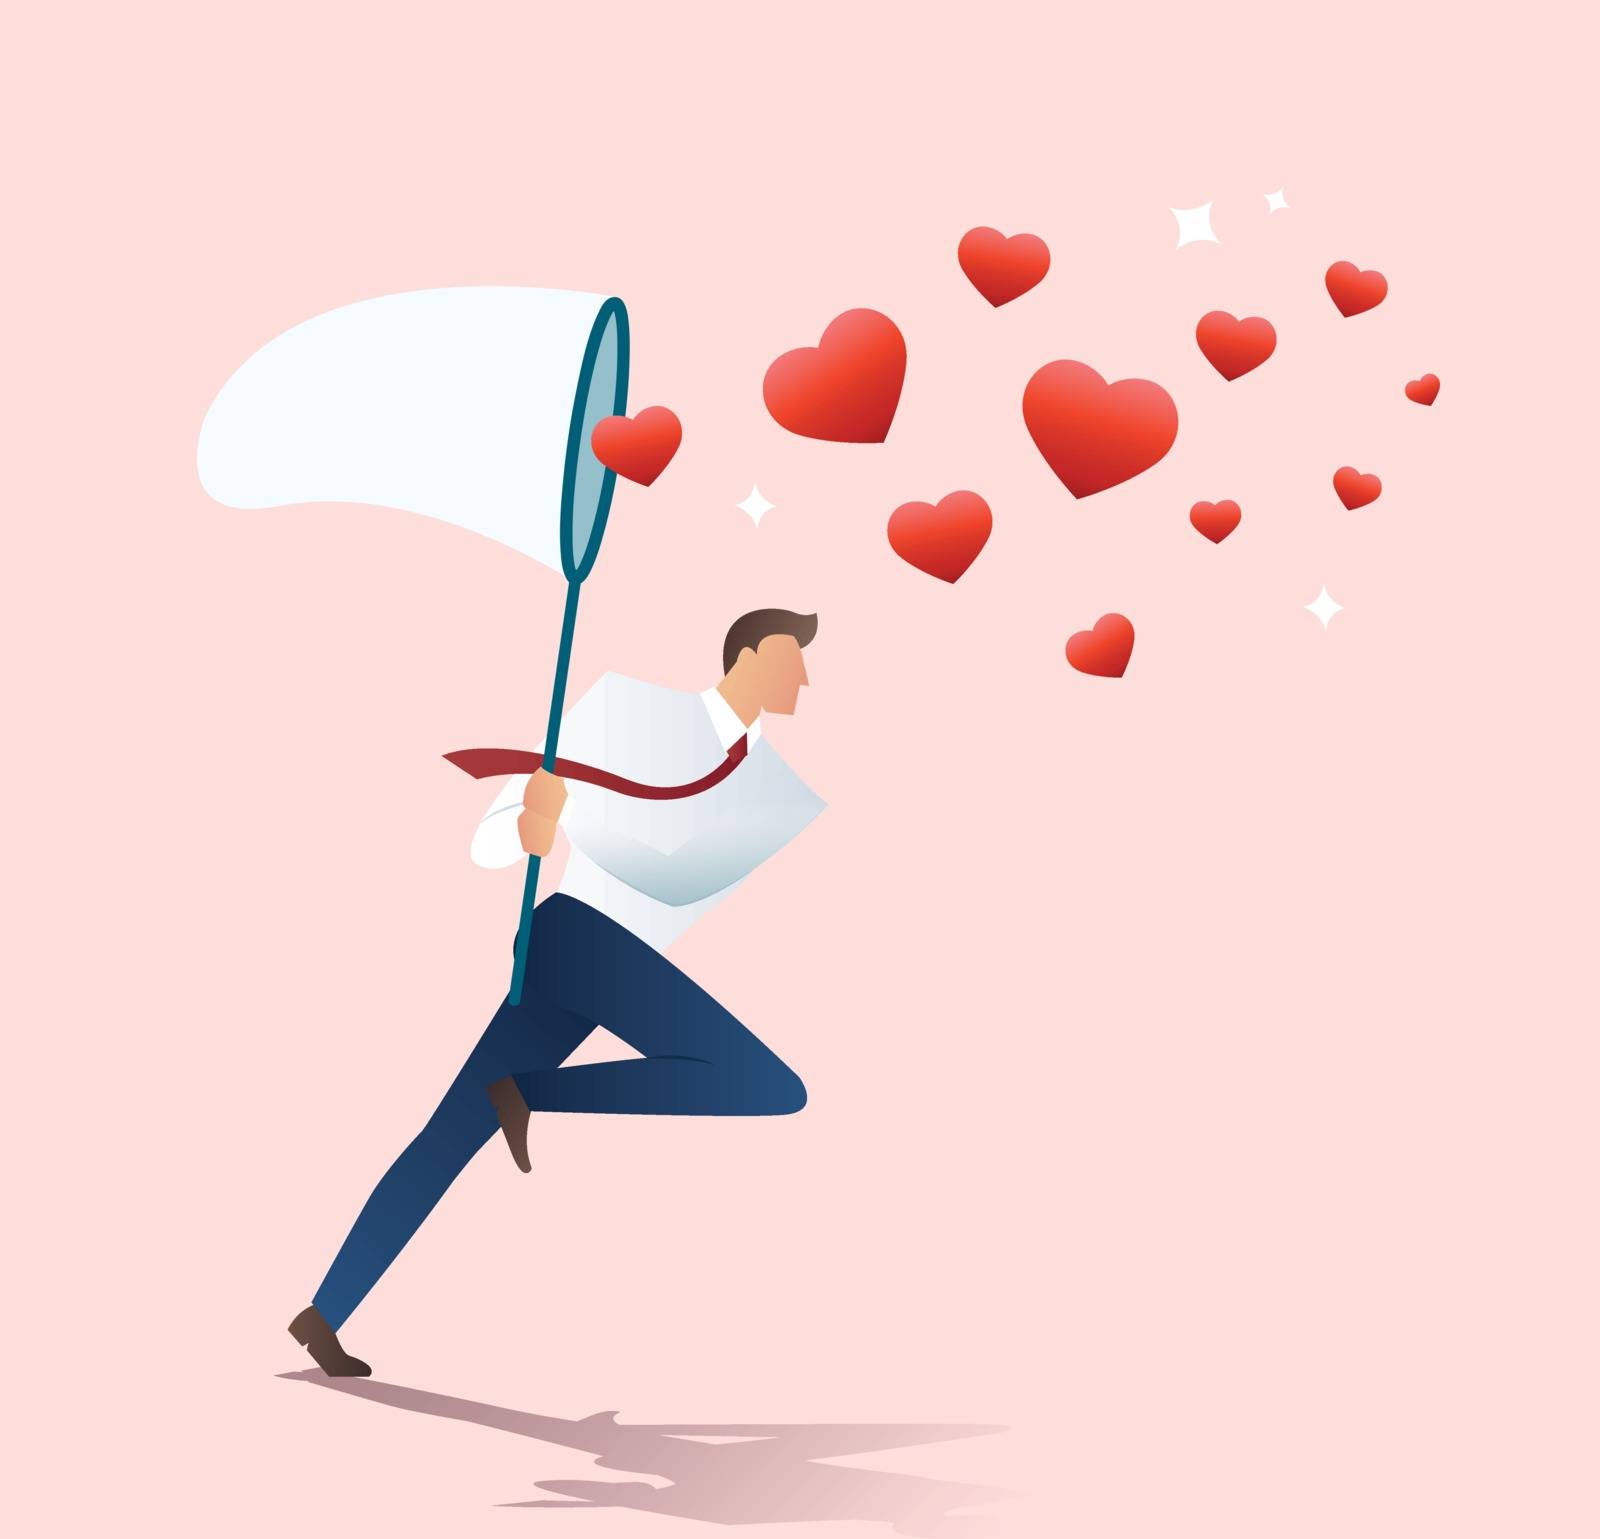 man holding a butterfly net trying to catch heart icons vector illustration